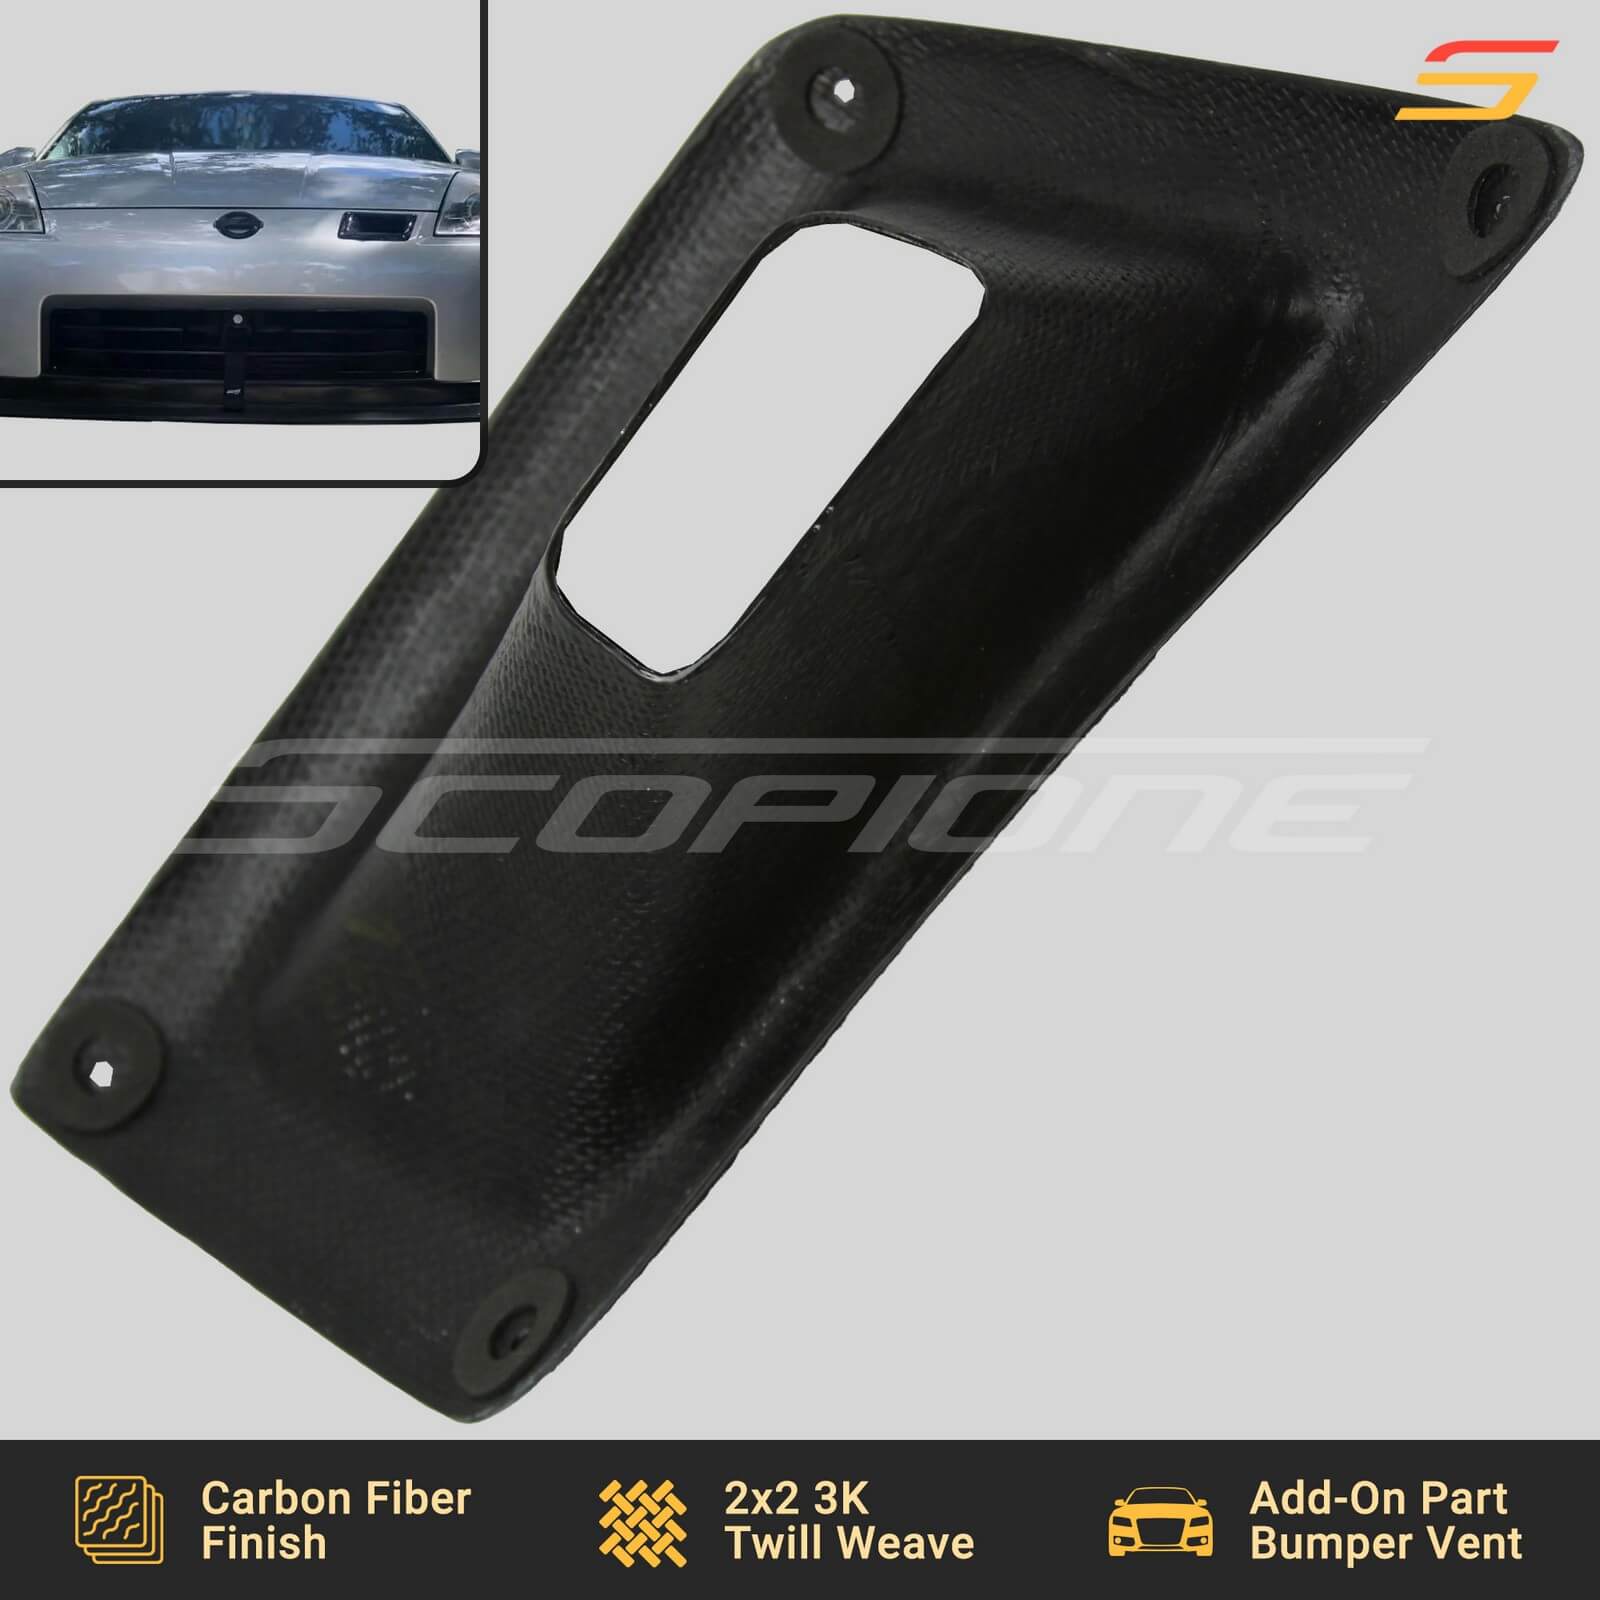 UV-Protective Clear Coated Anti-aging Unique & Special Design Single Left Side Front Bumper Intake Air Duct For Nissan 350Z Z33 2003-2009 Glossy Carbon Fiber Appearance 